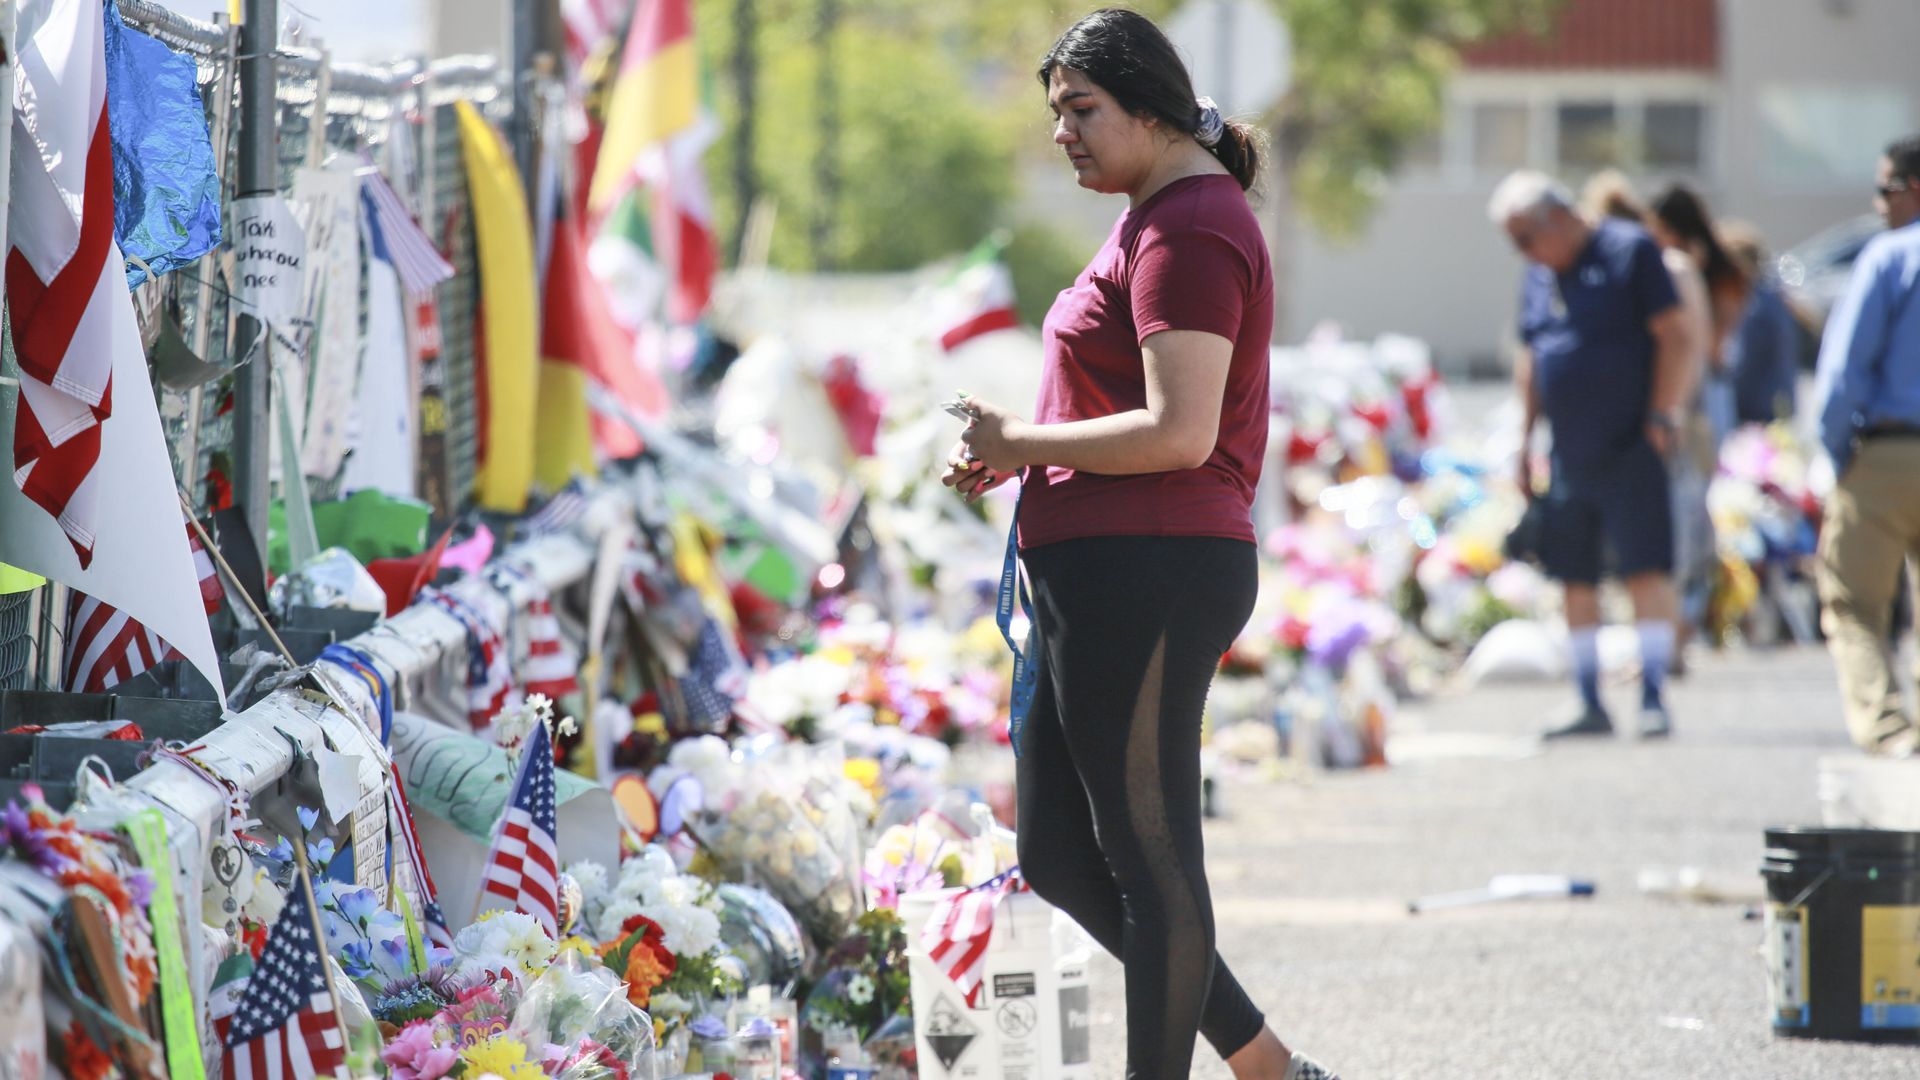 A woman paying her respects at a makeshift memorial for the victims in El Paso. Photo: Sandy Huffaker/Getty Images